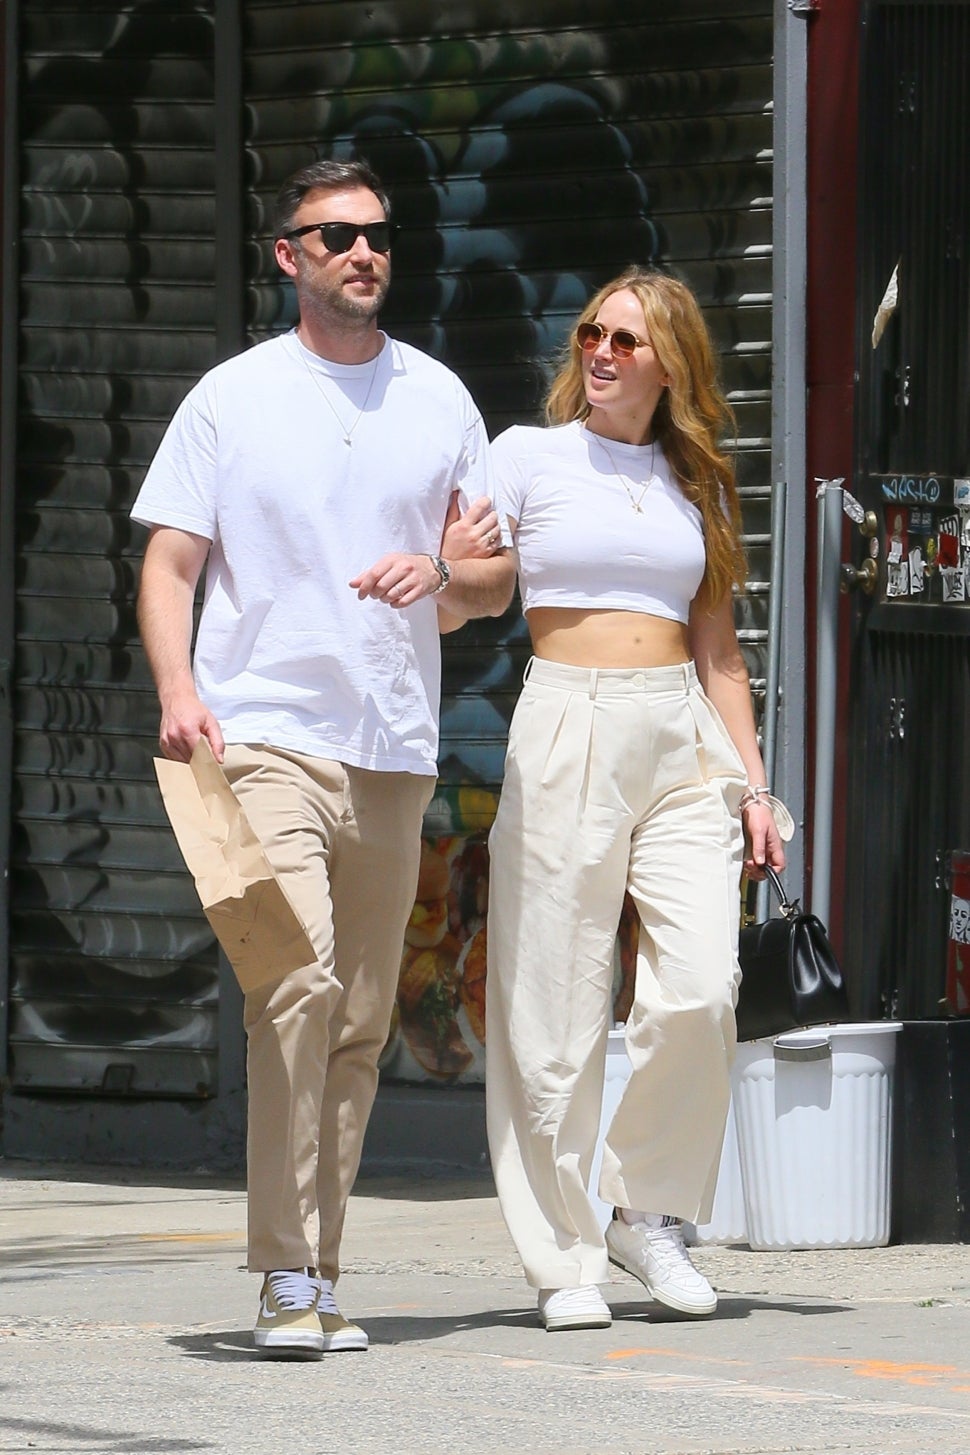 ennifer Lawrence and Cooke Maroney are a matching duo while walking home arm in arm after a lunch date in SoHo.